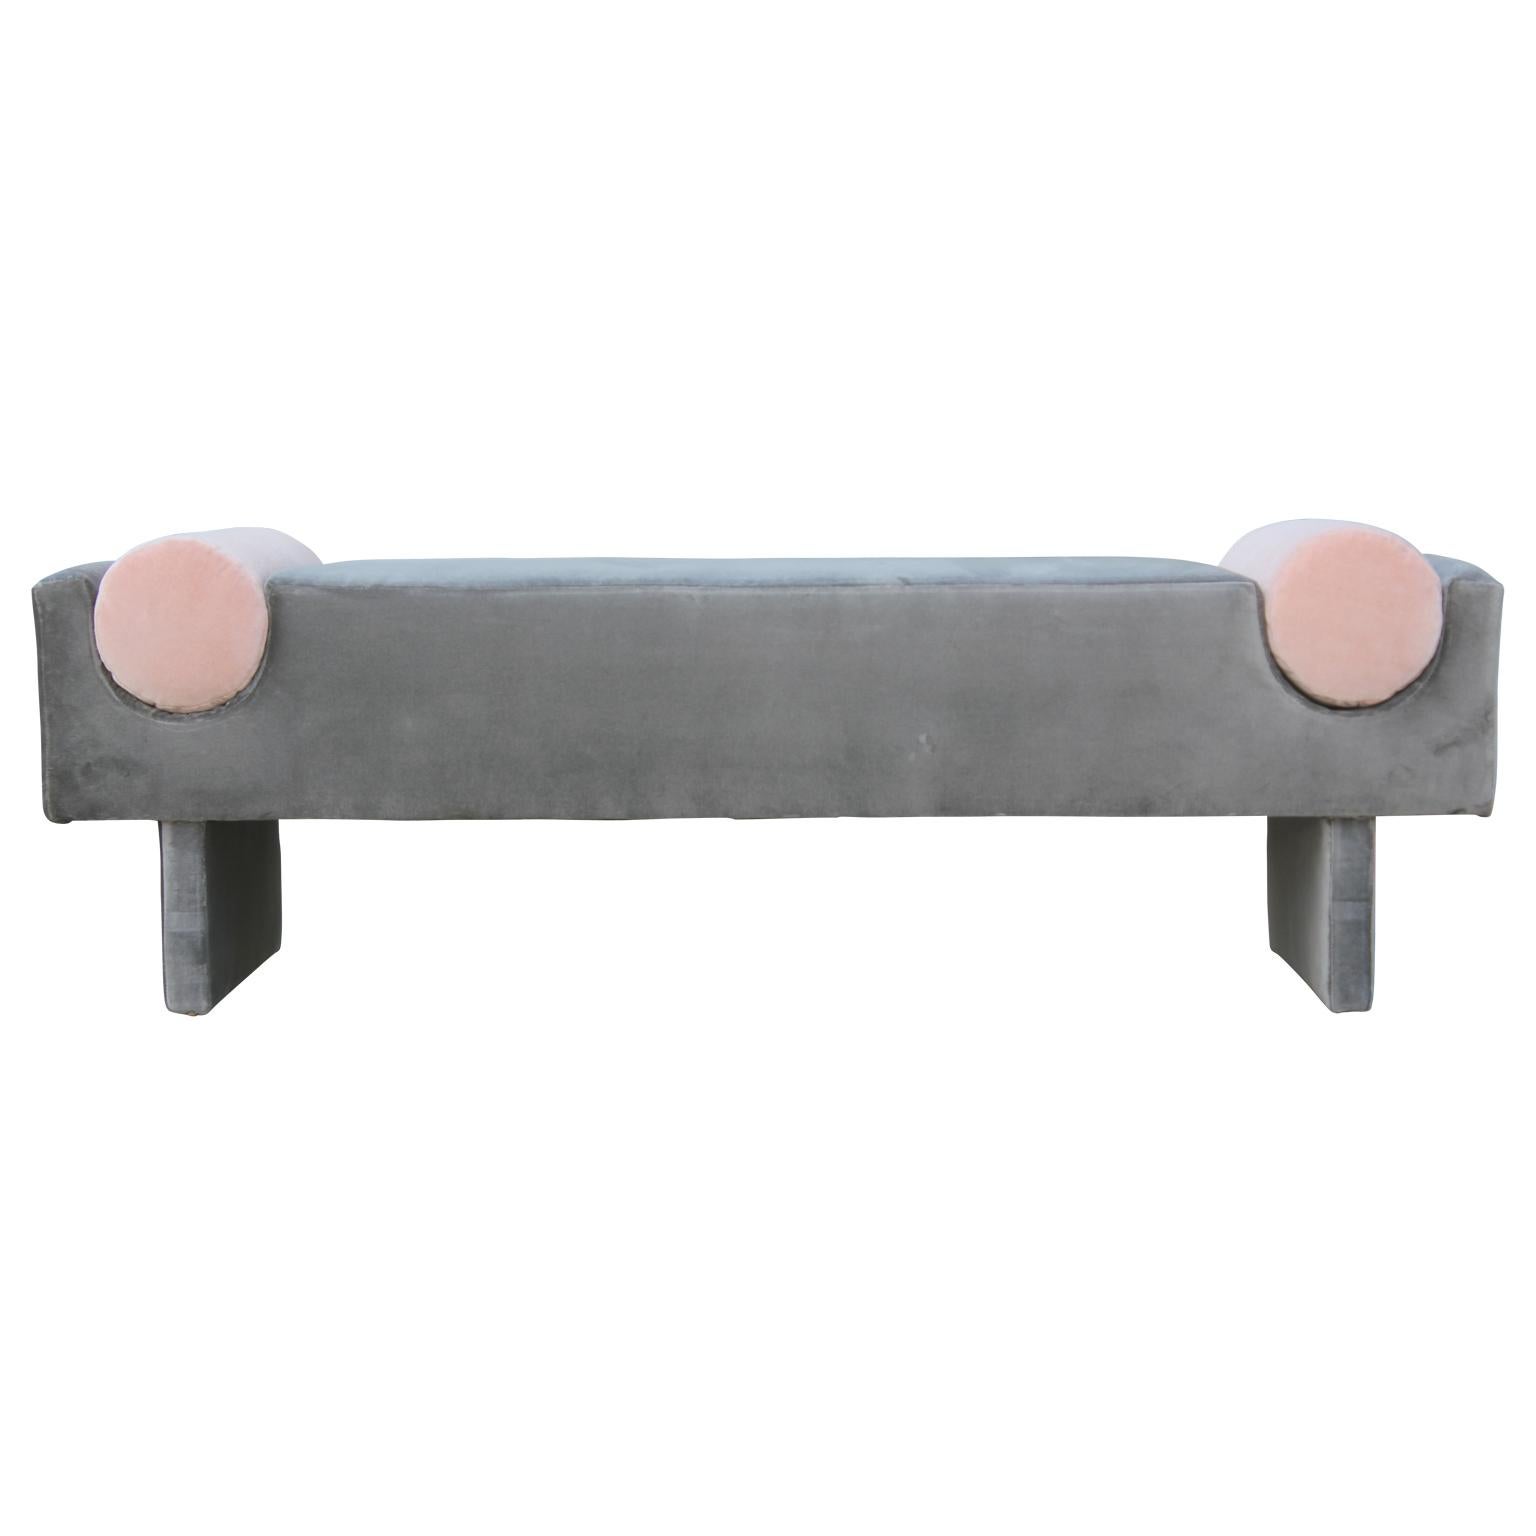 Custom-made rectangular bench upholstered in a lush grey velvet and attached bolster accents upholstered in a lovely light pink velvet.